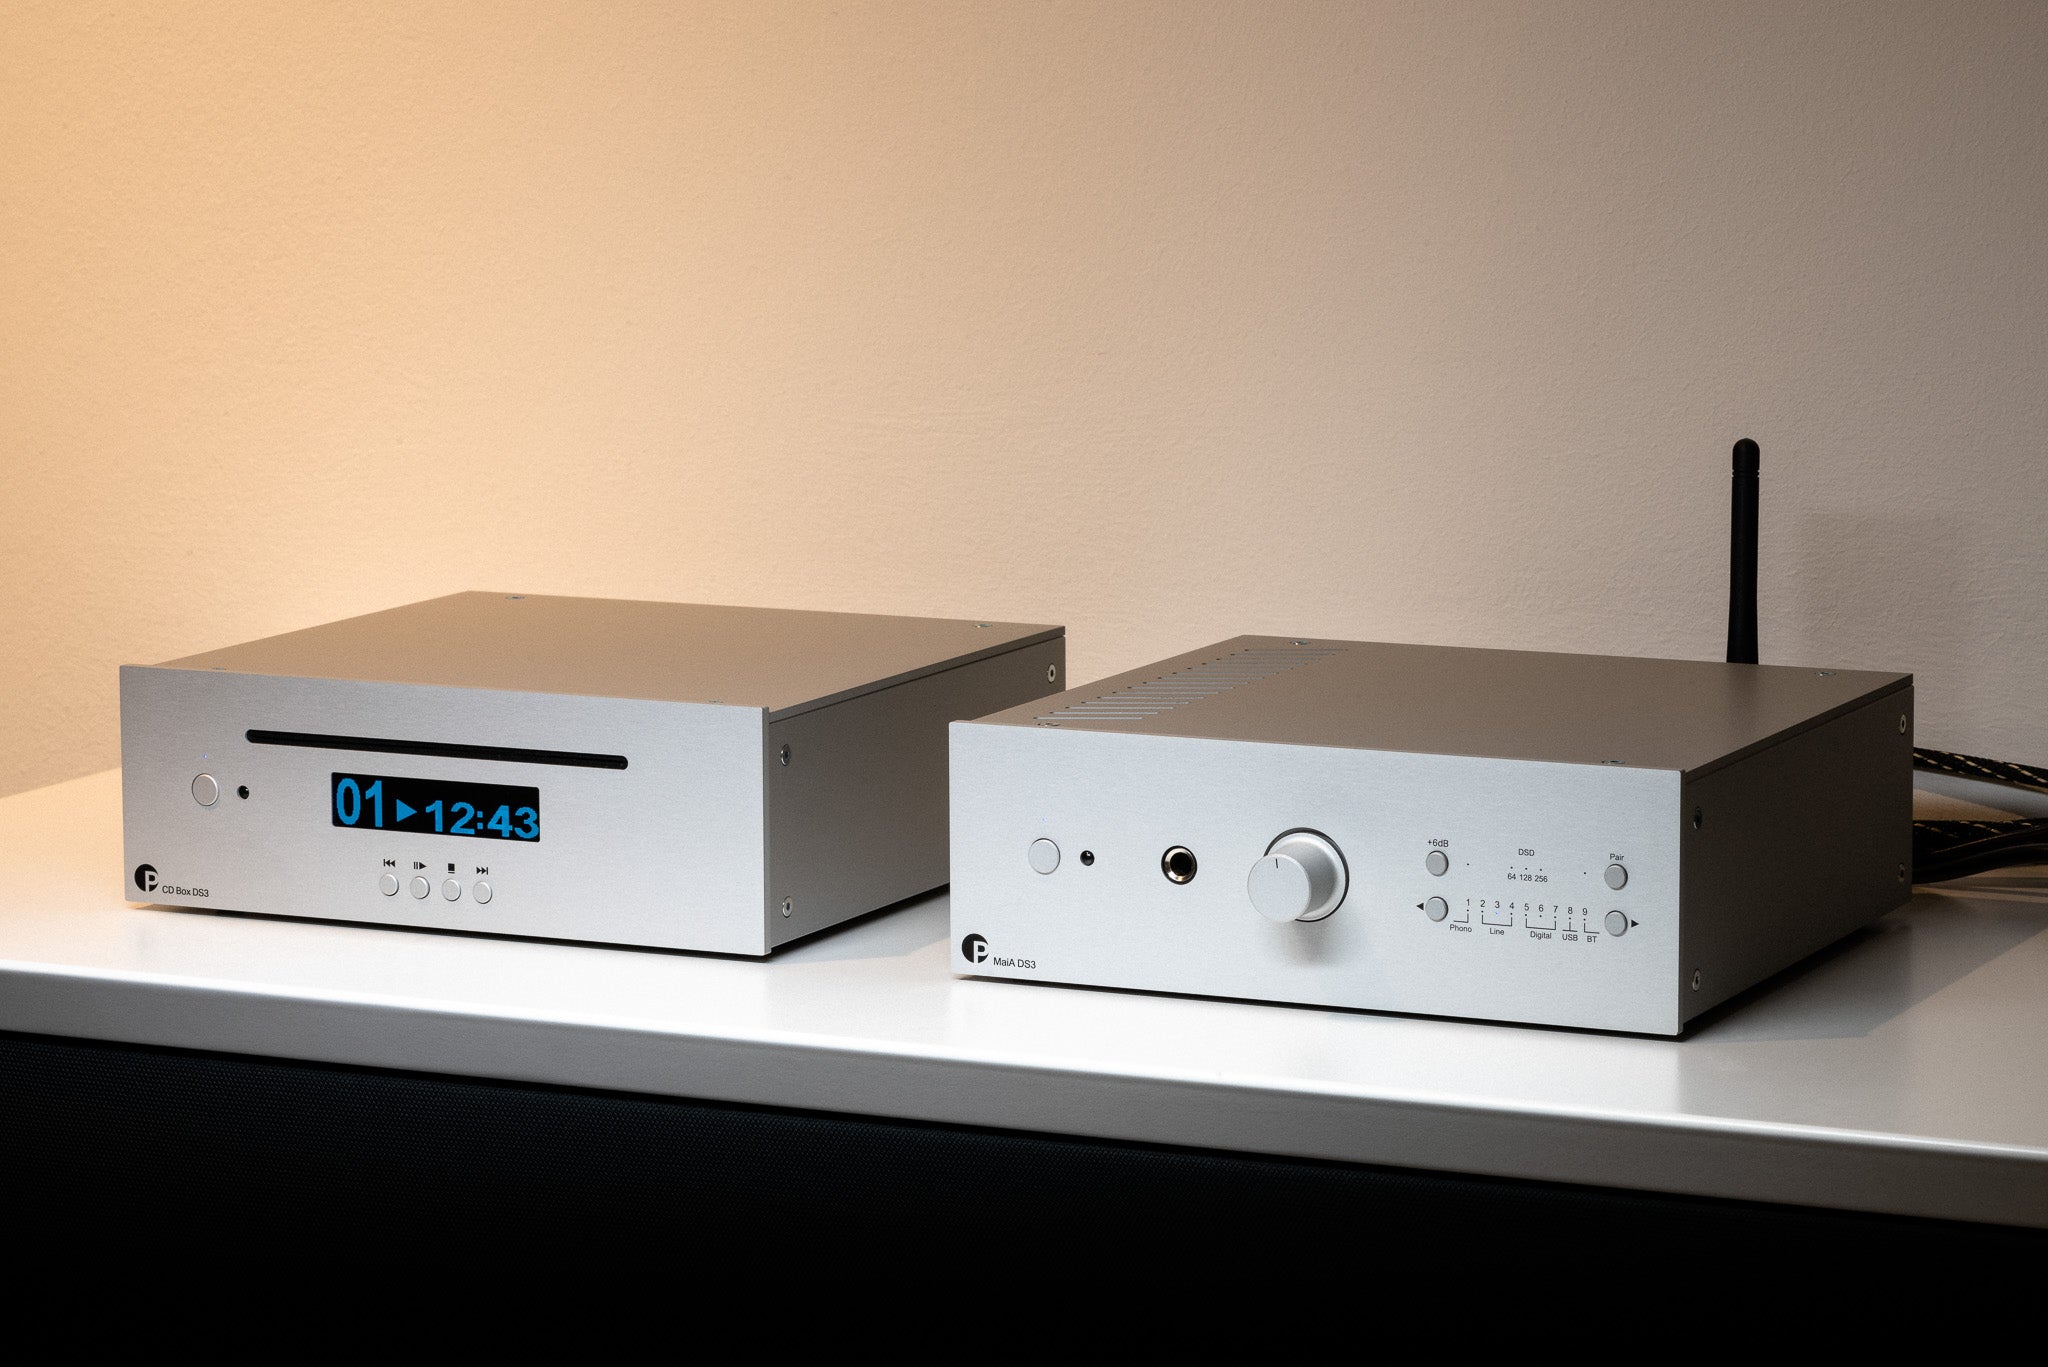 Pro-Ject MaiA DS3 integrated amplifier